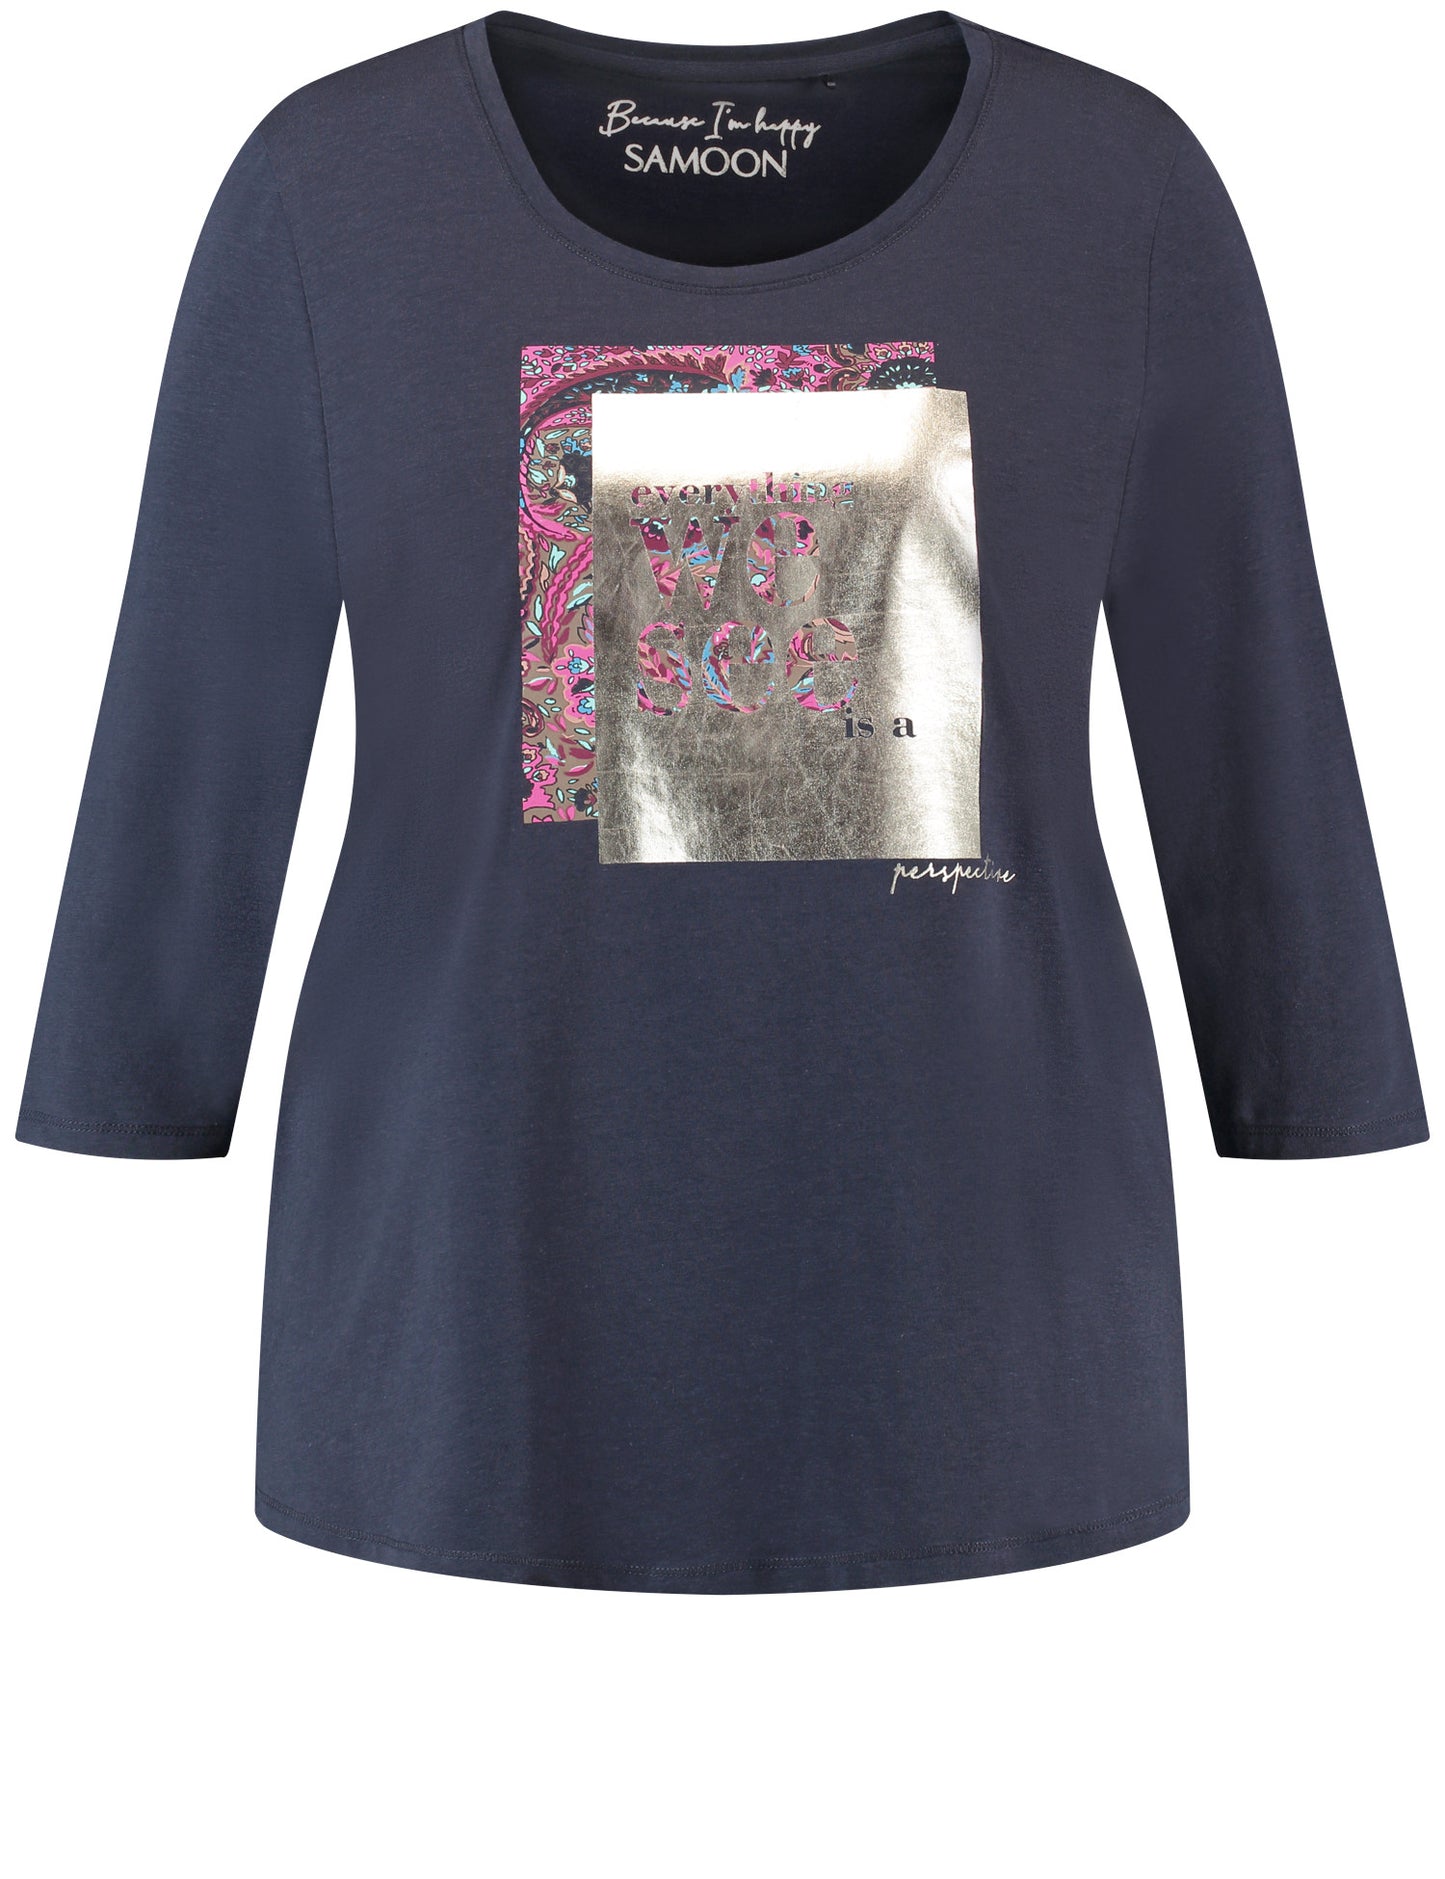 3/4-sleeve shirt with front print